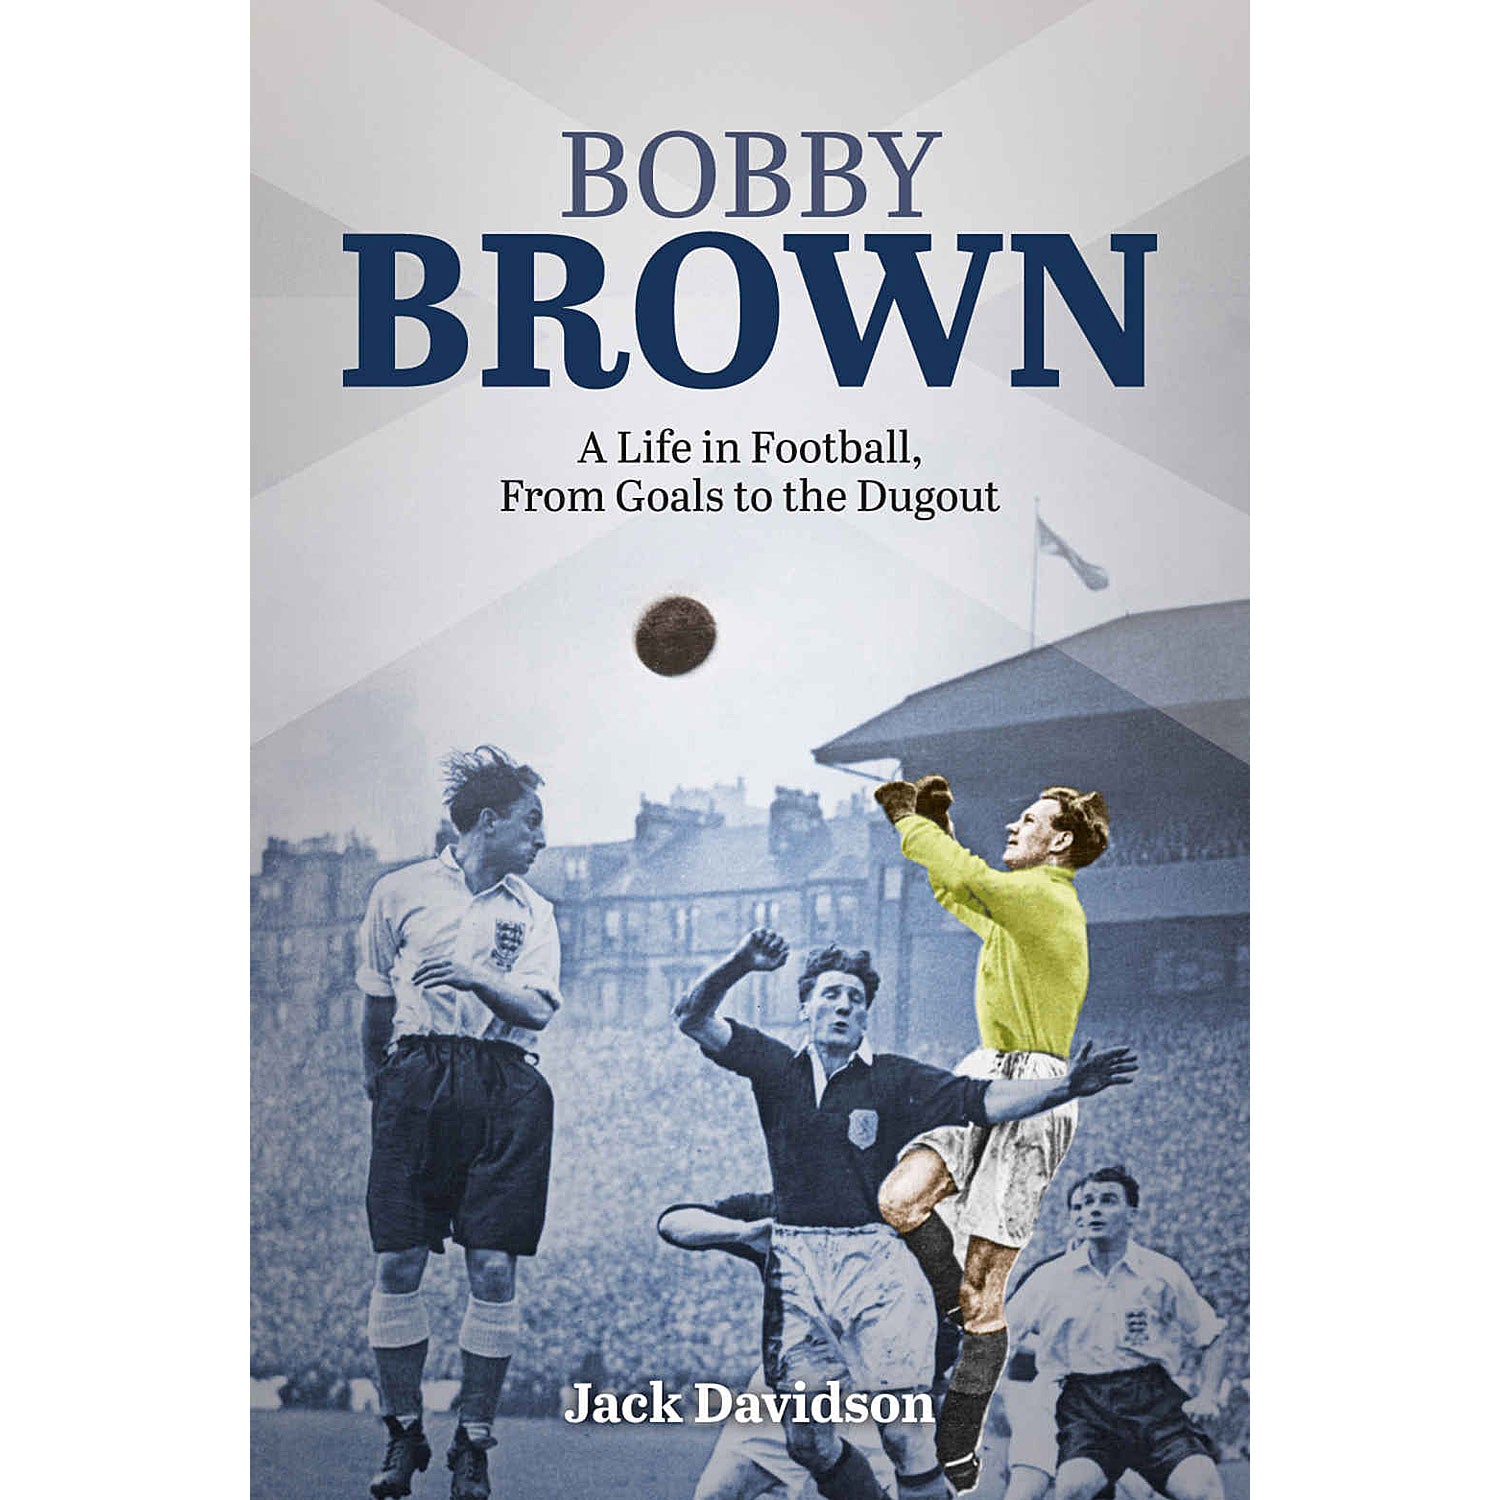 Bobby Brown – A Life in Football, From Goals to the Dugout